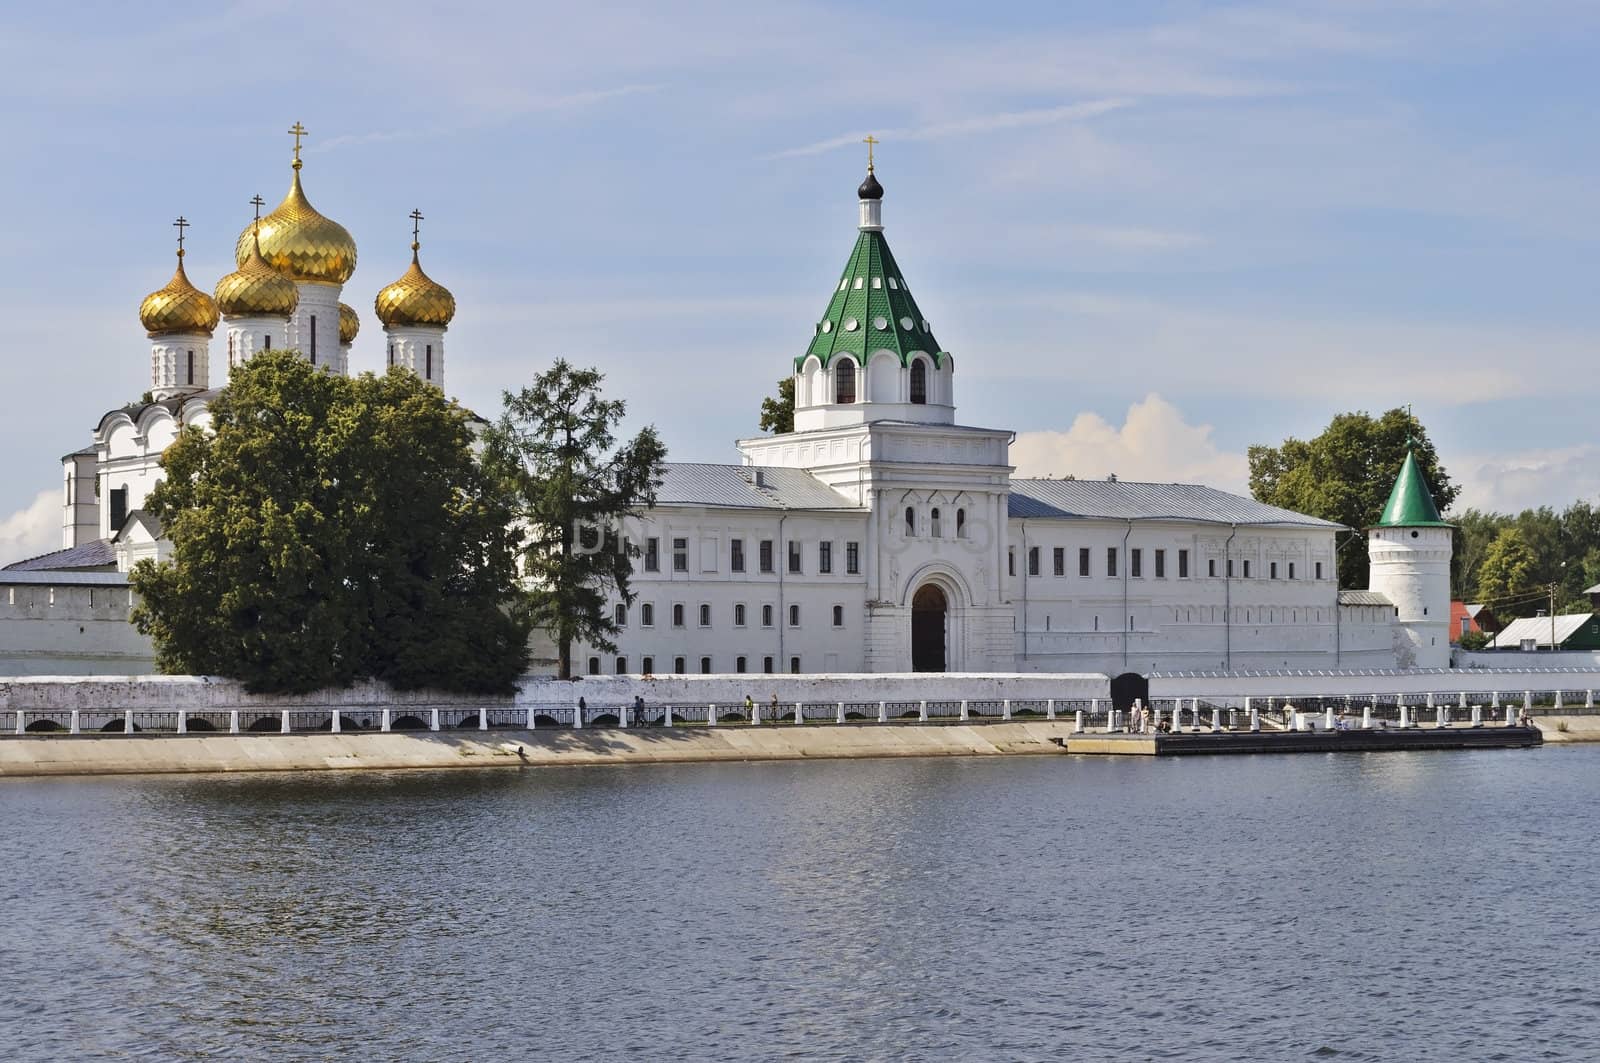 Ipatiev Monastery on the bank of Kostroma river, Russia